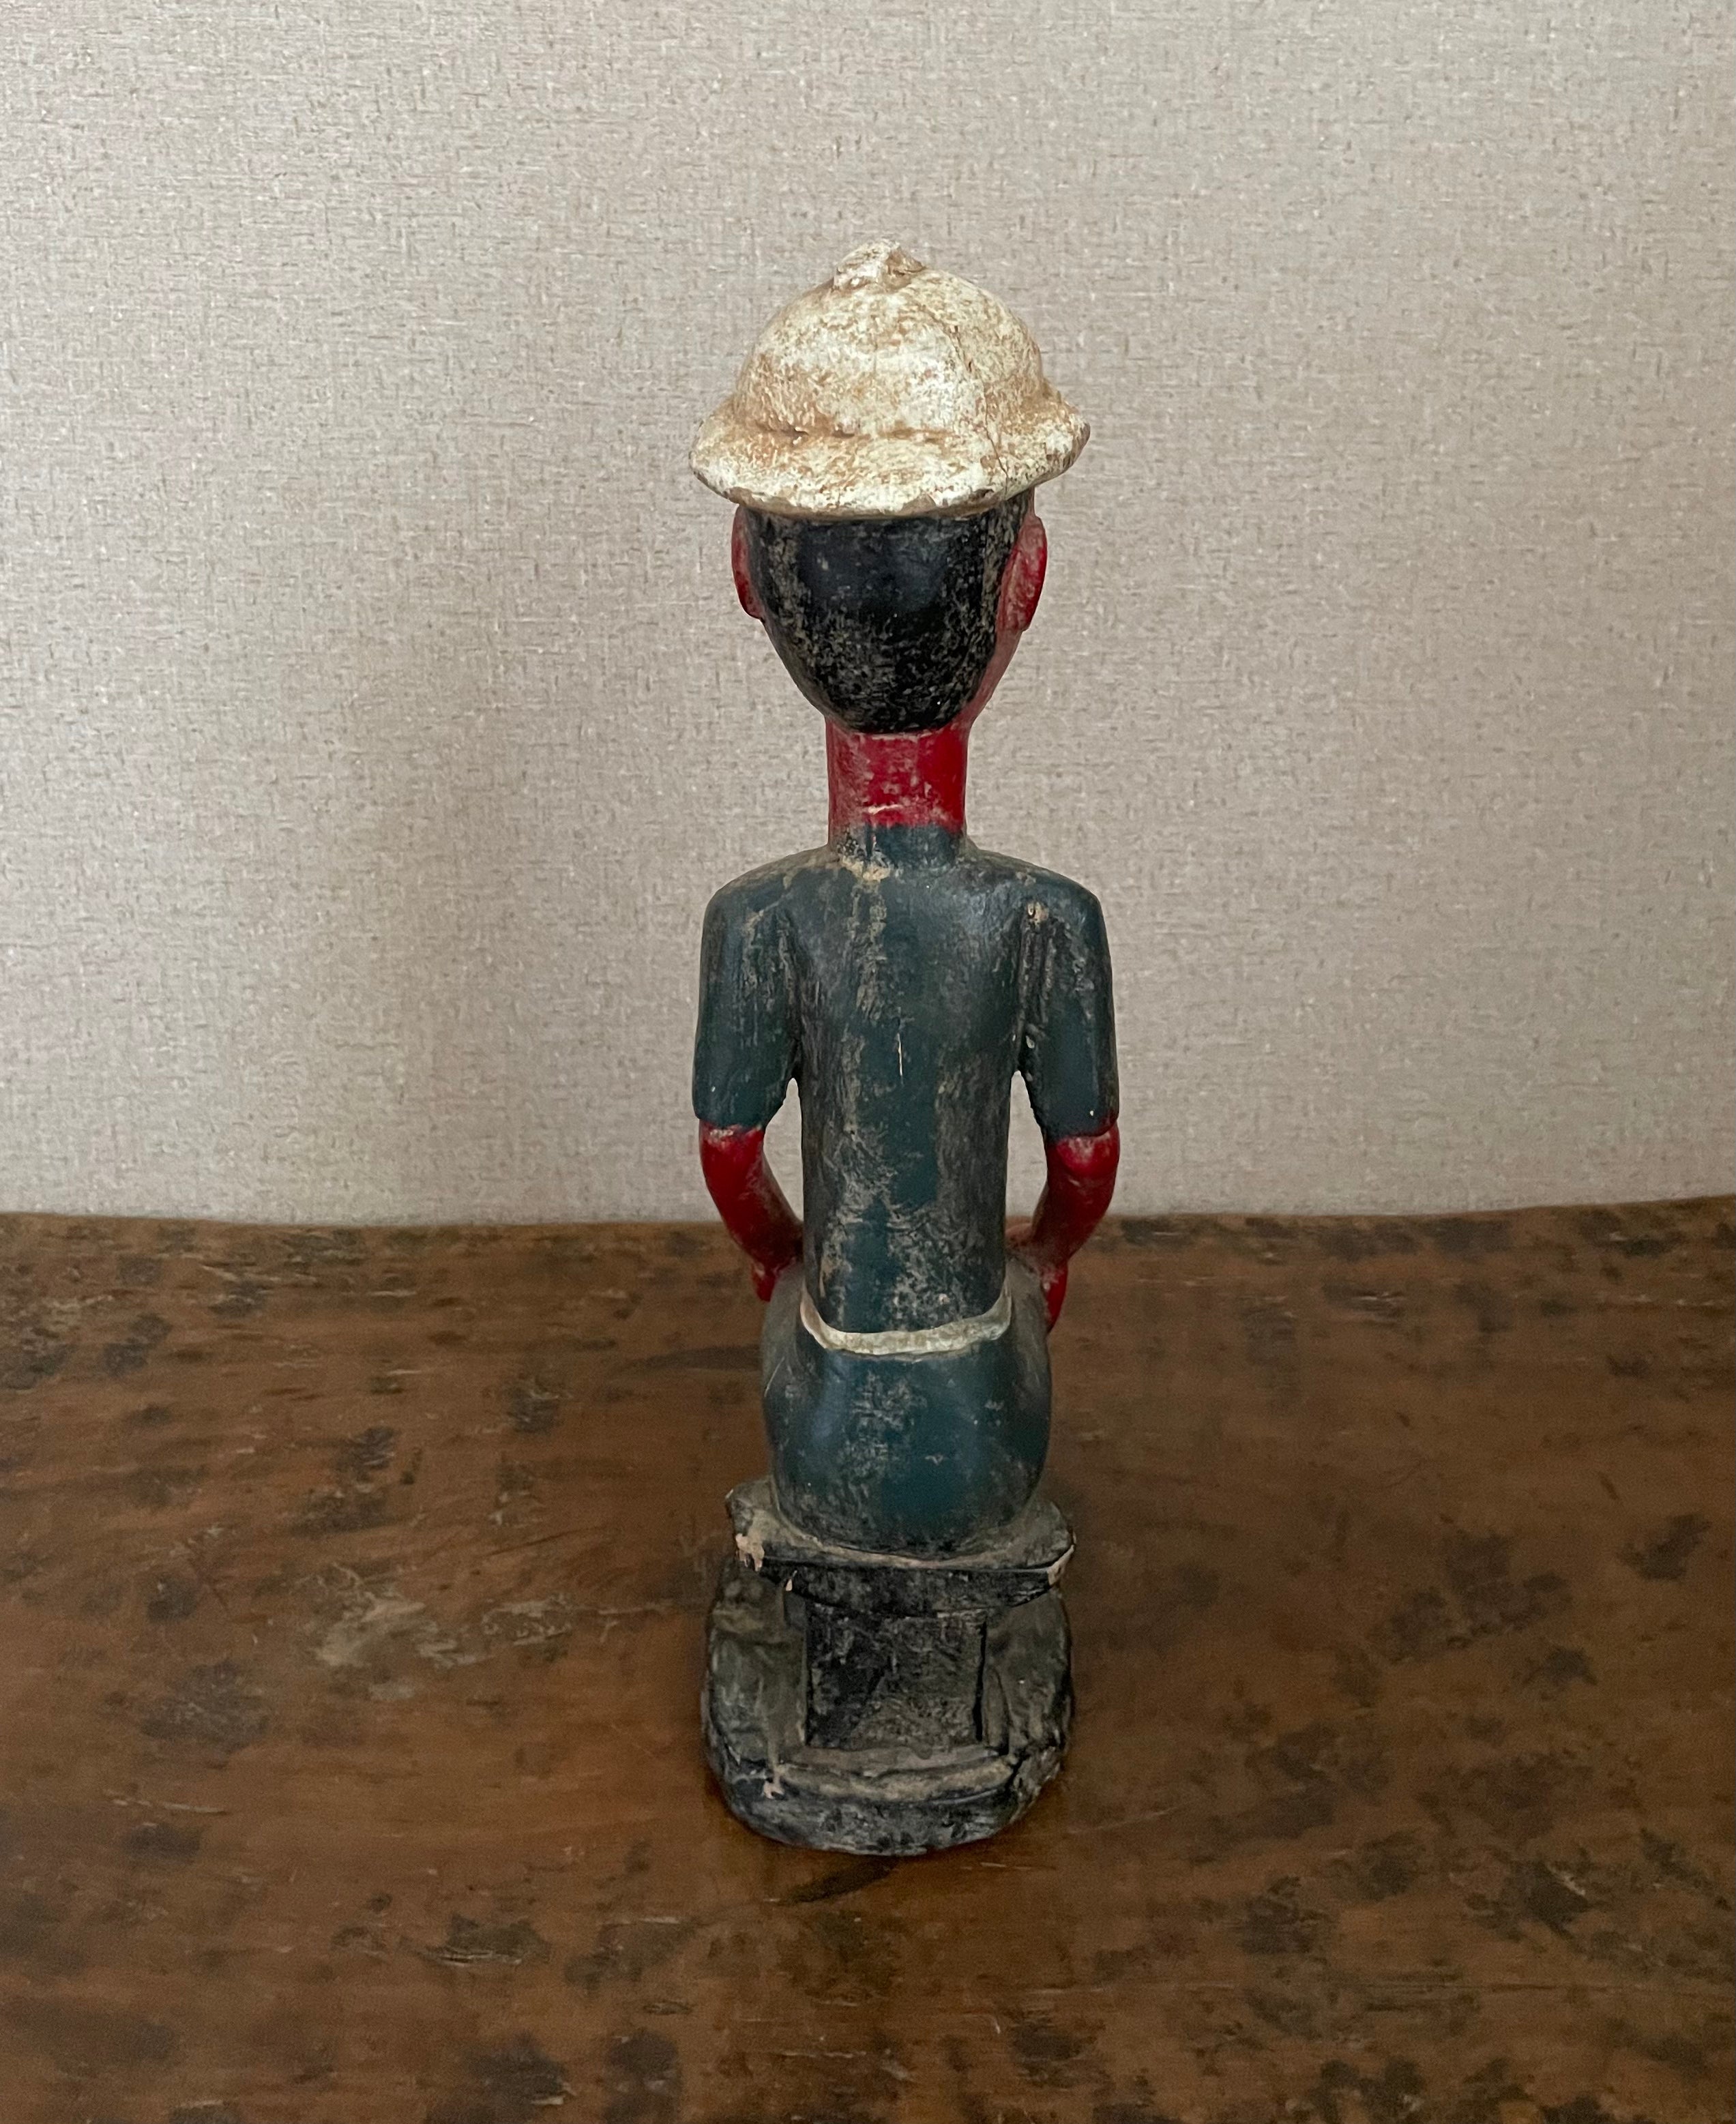 Handcrafted Sculptures - Collection - African Art - Sculptures Statues -  Artwork - Artisan Designed - Handcrafted - Home Decor - Office - Any Room - This vintage African Painted Seated Male Statue is crafted from quality wood, then painted to create a lifelike African sculpture. The perfect addition to your home décor, it measures 15